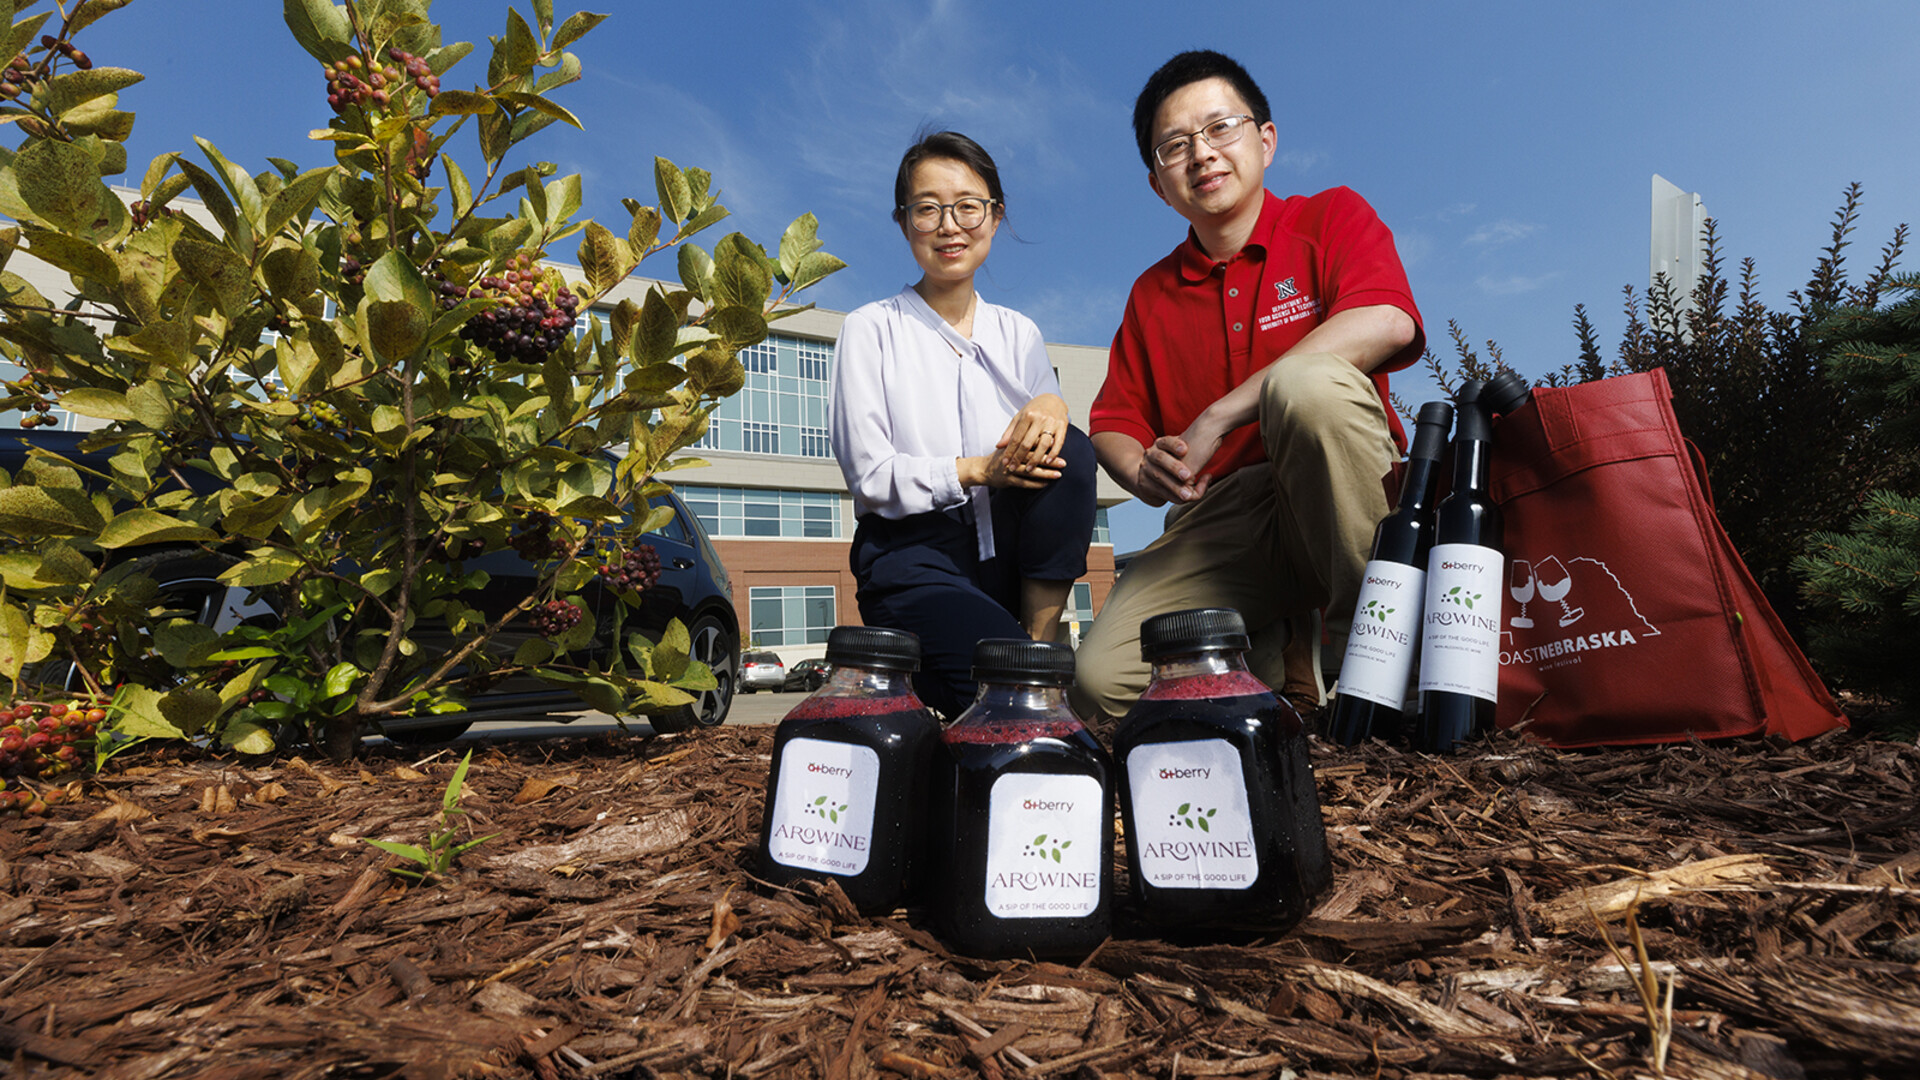 Berry study leads to sweet faculty startup